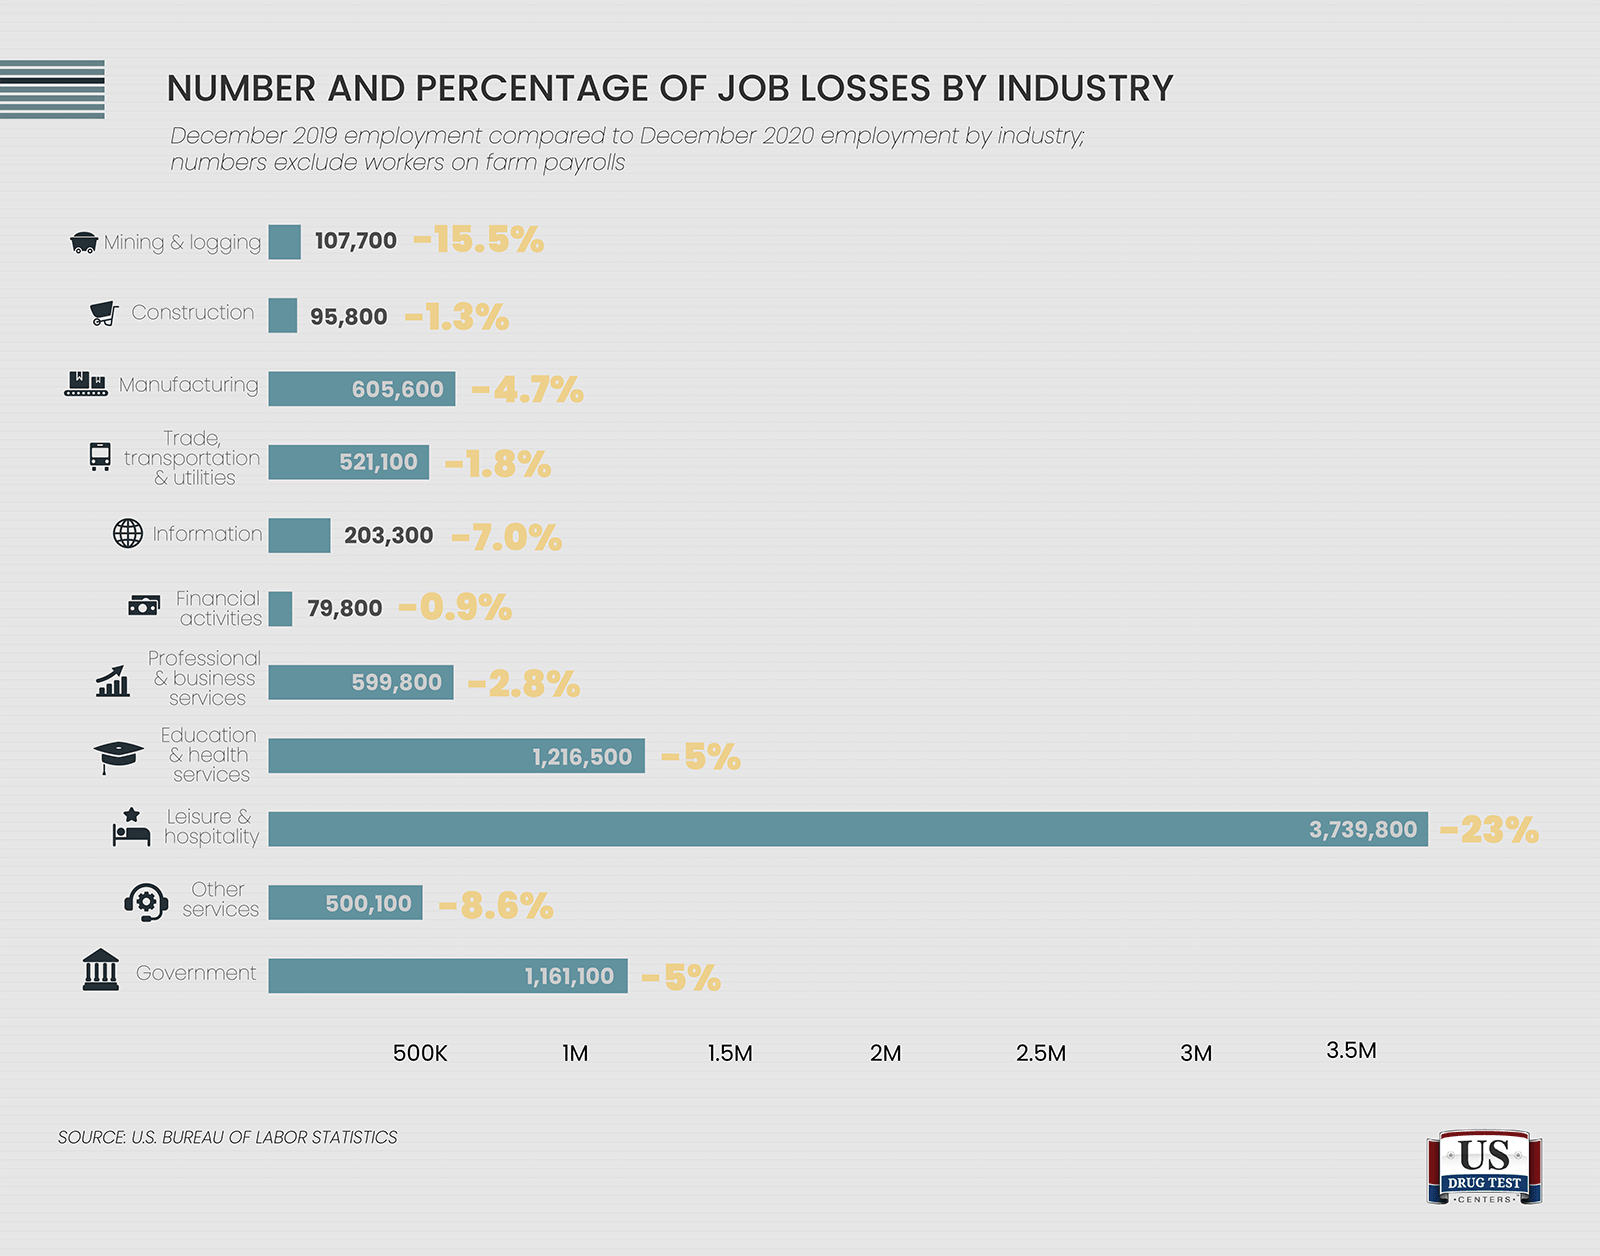 Number and percentage of job losses by industry